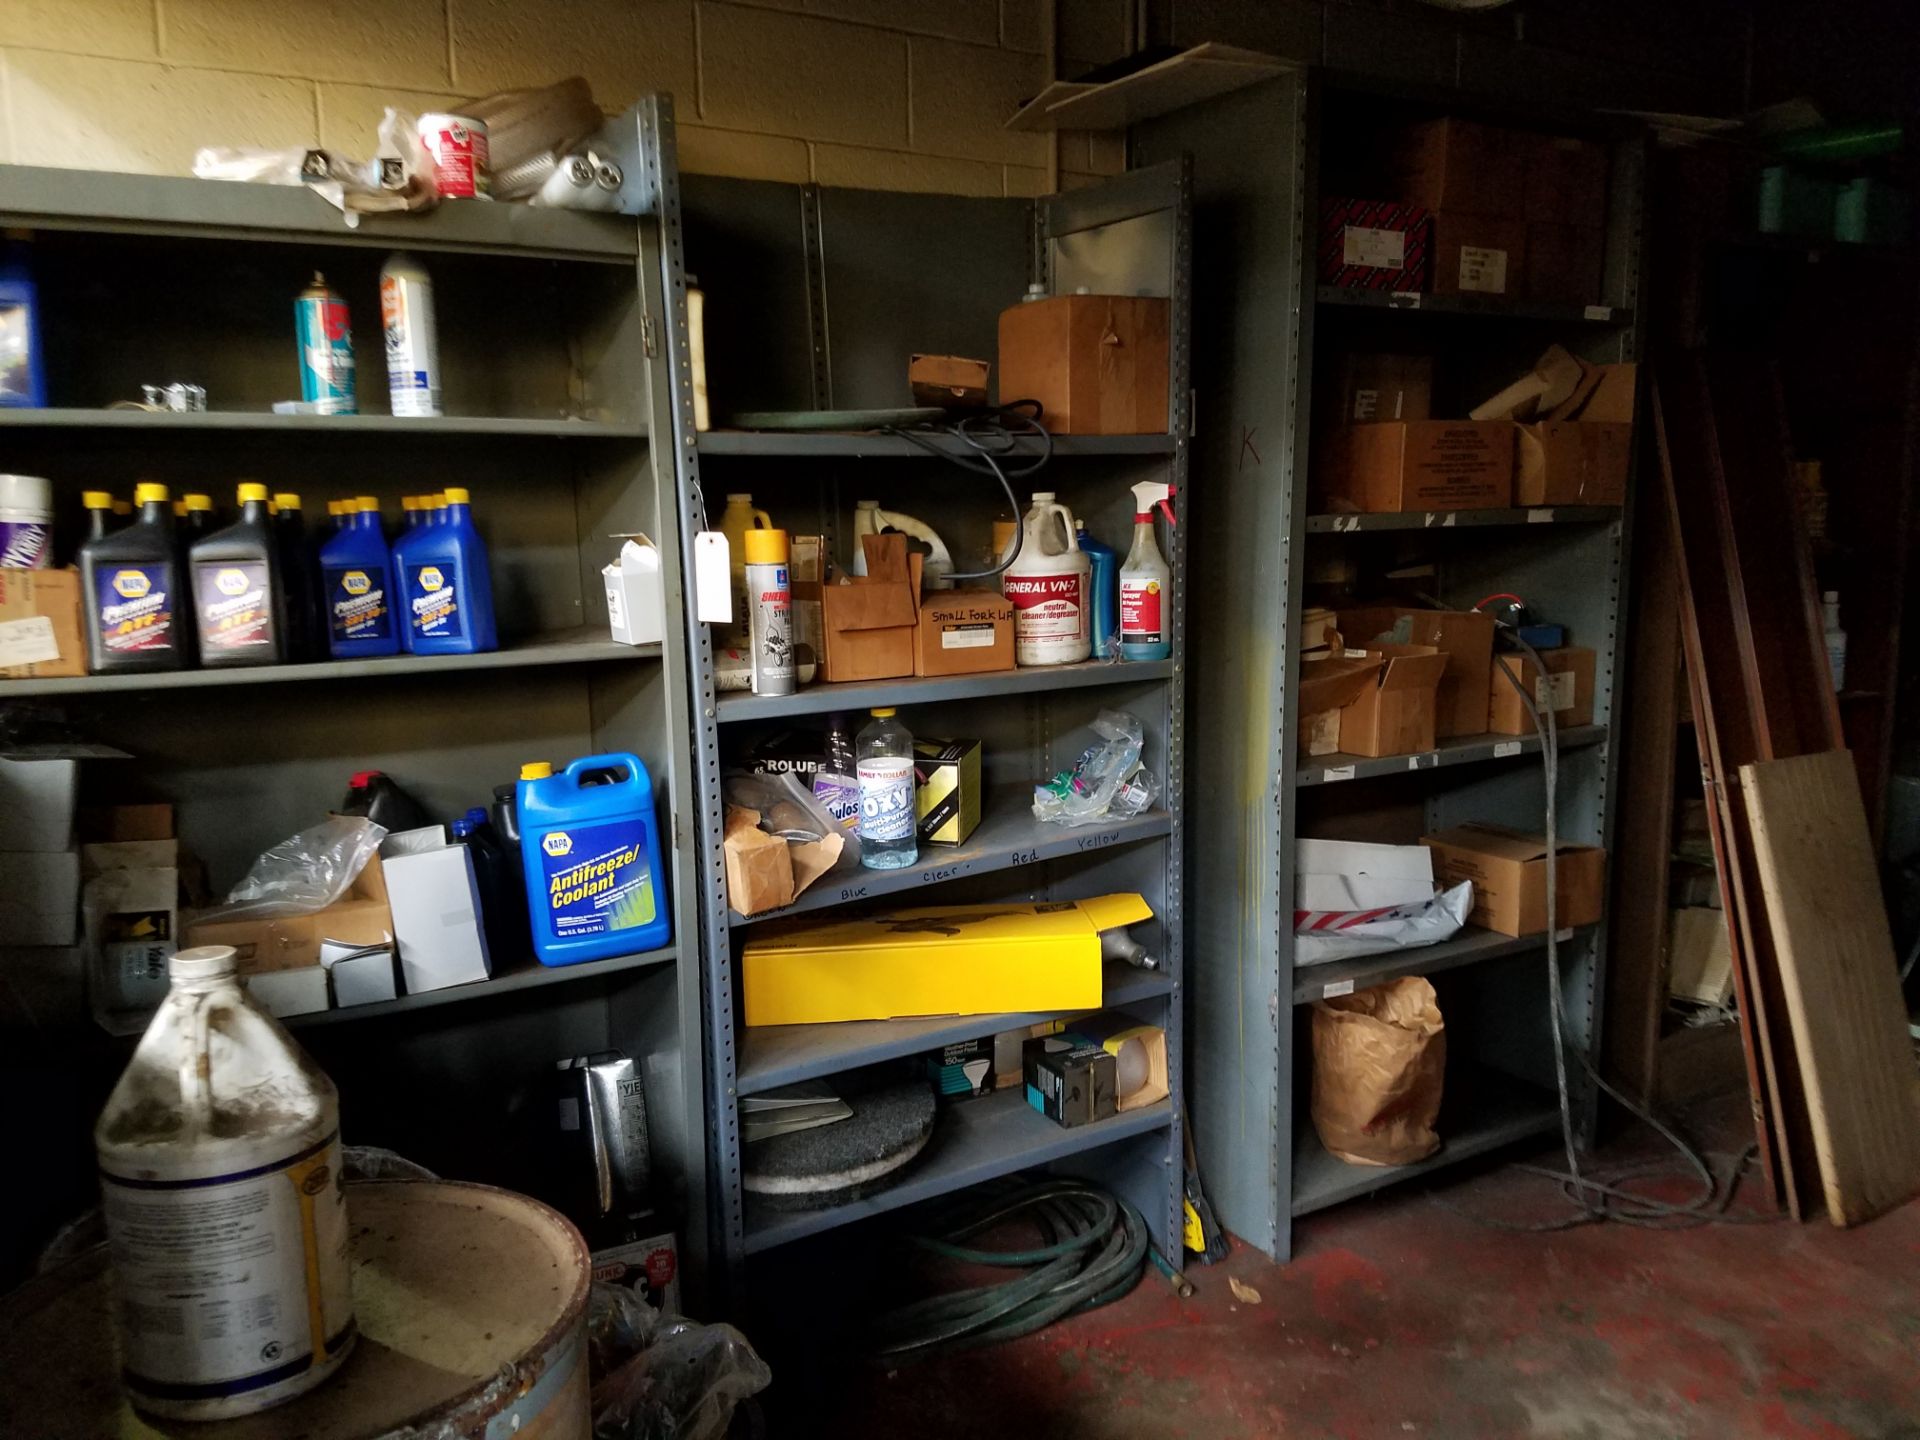 CONTENTS OF MAINTENANCE ROOM - NOTHING ATTACHED SHELVES, OIL, AUTOMOTIVE, MISC CLEANING, NOTHING